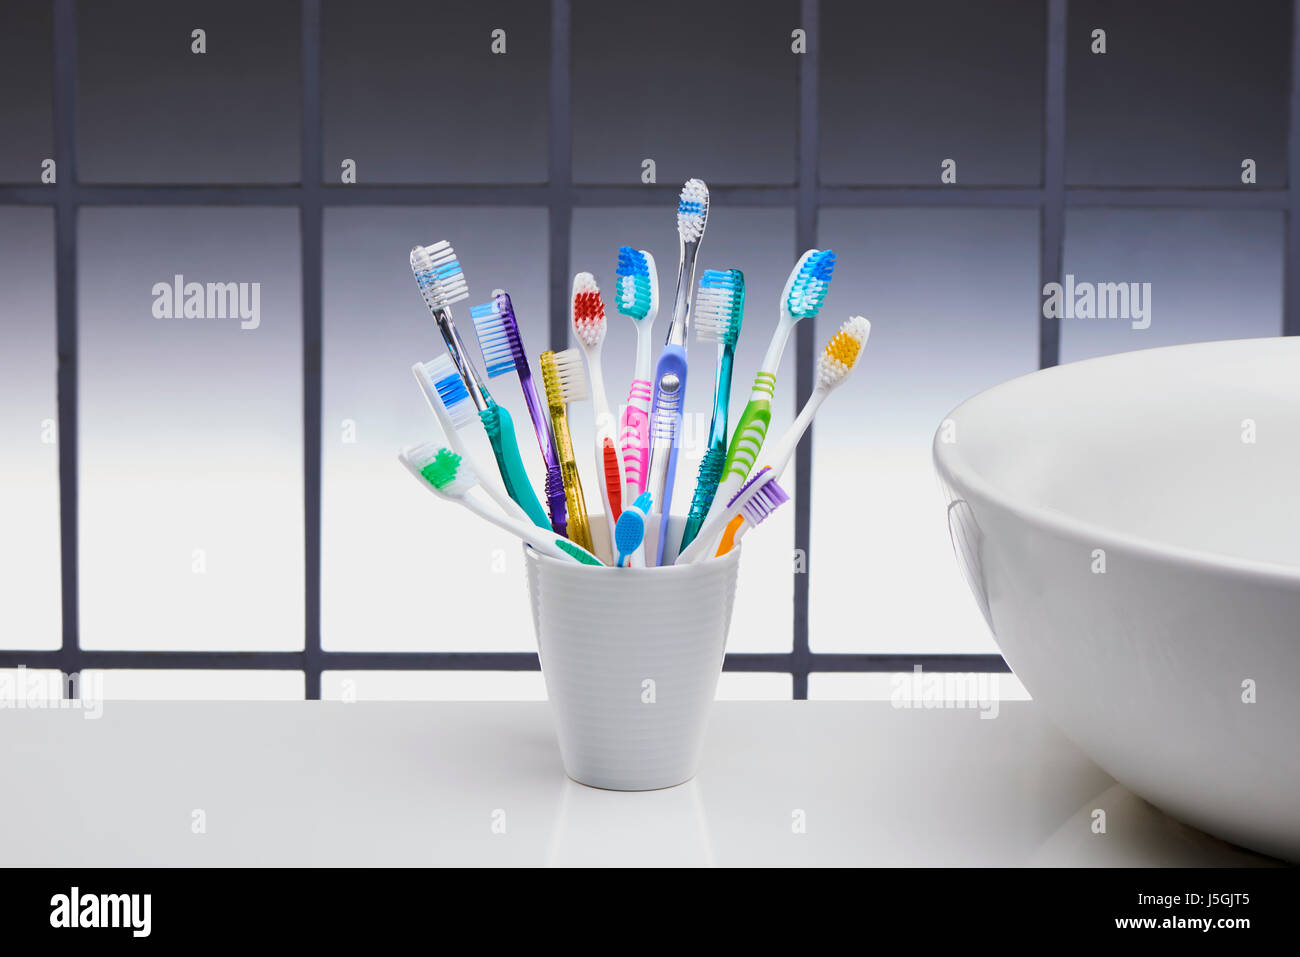 Pot of Toothbrushes Stock Photo